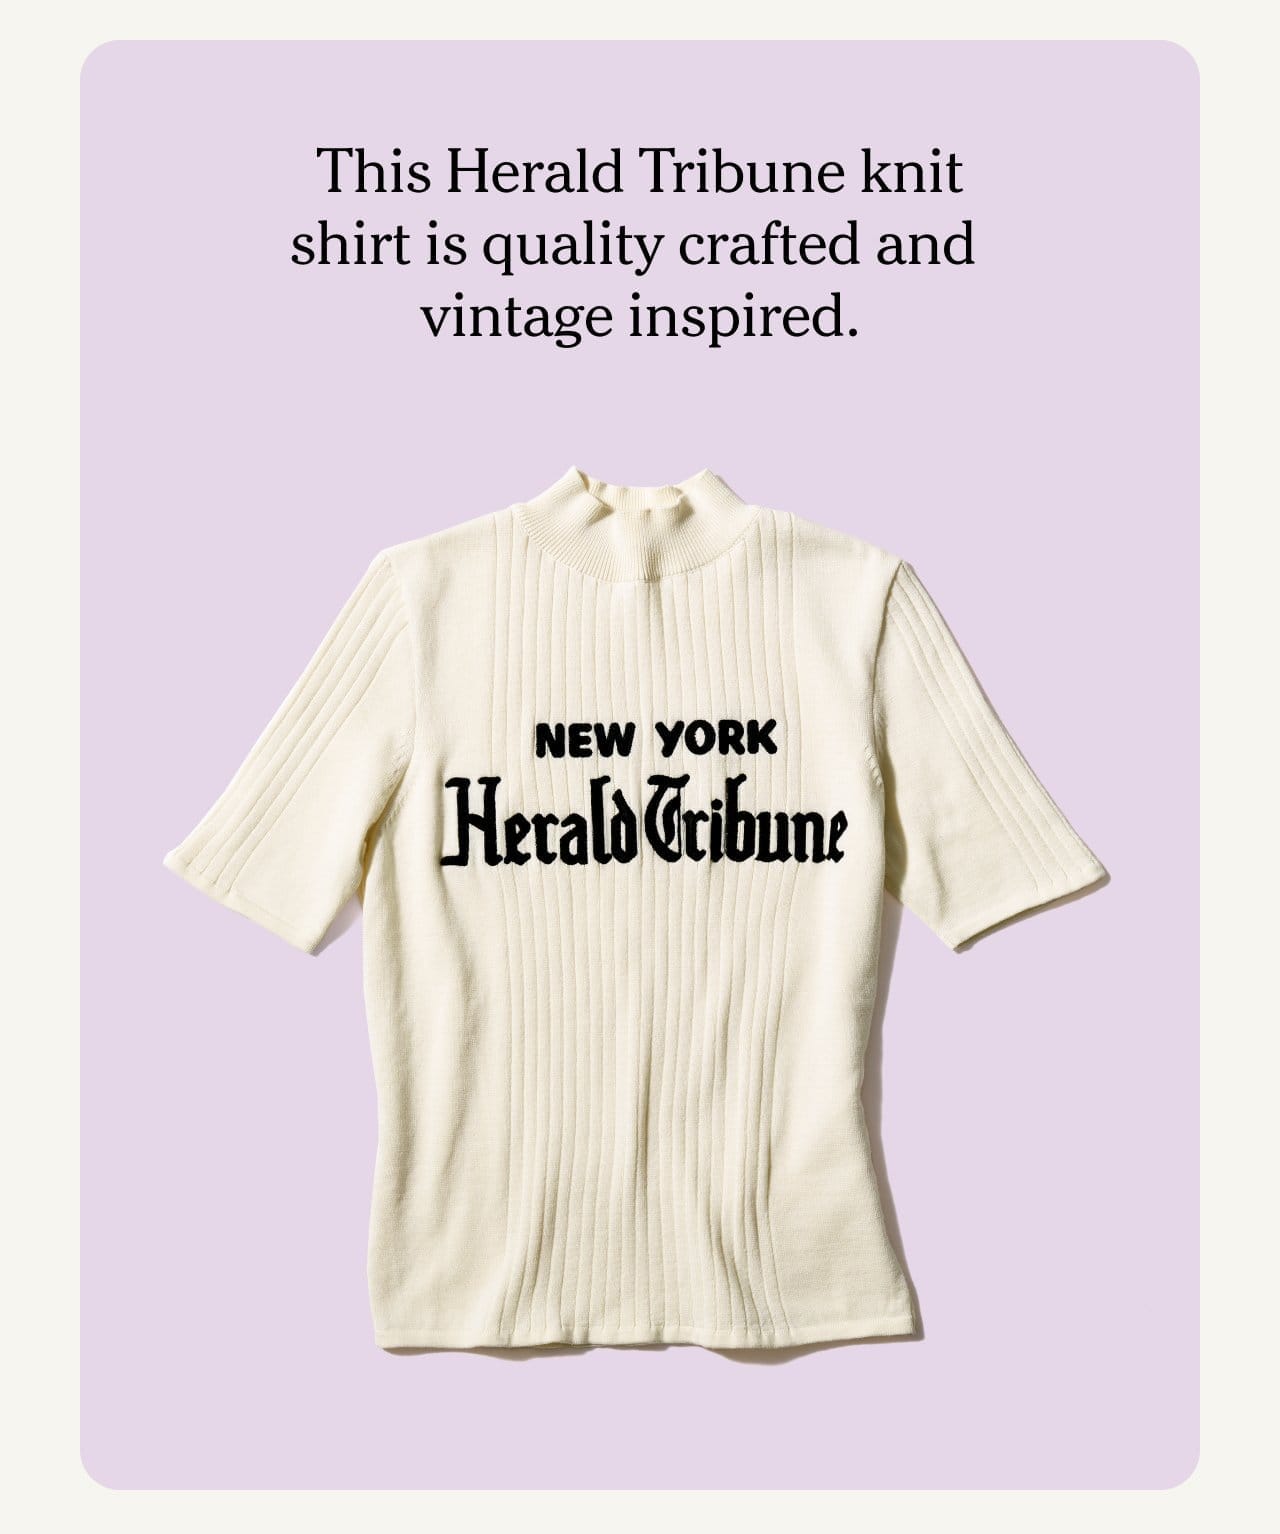 This Herald Tribune knit shirt is quality crafted and vintage inspired.